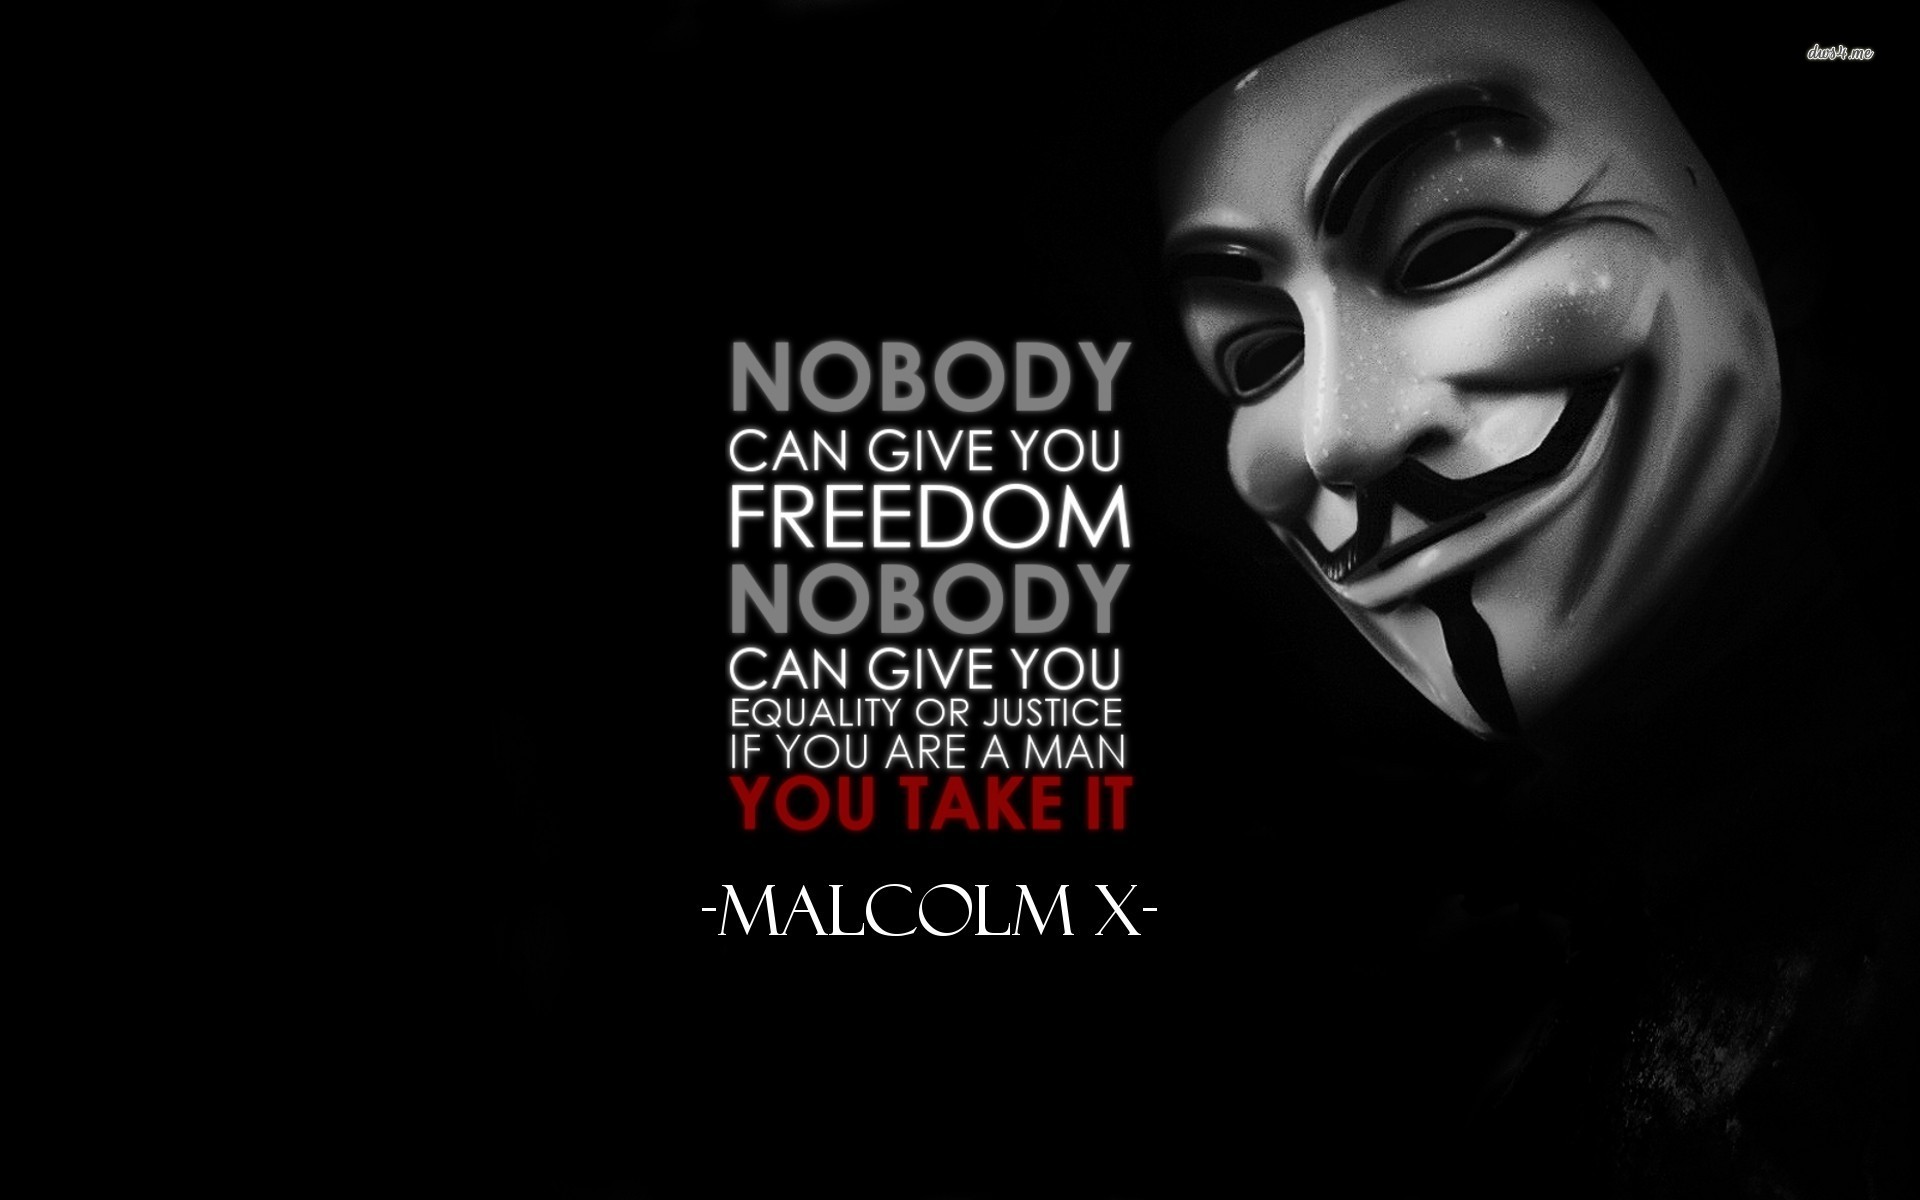 Nobody can give you freedom. Nobody can give you equality or justice or anything. If you're a man, you take it. Malcolm X